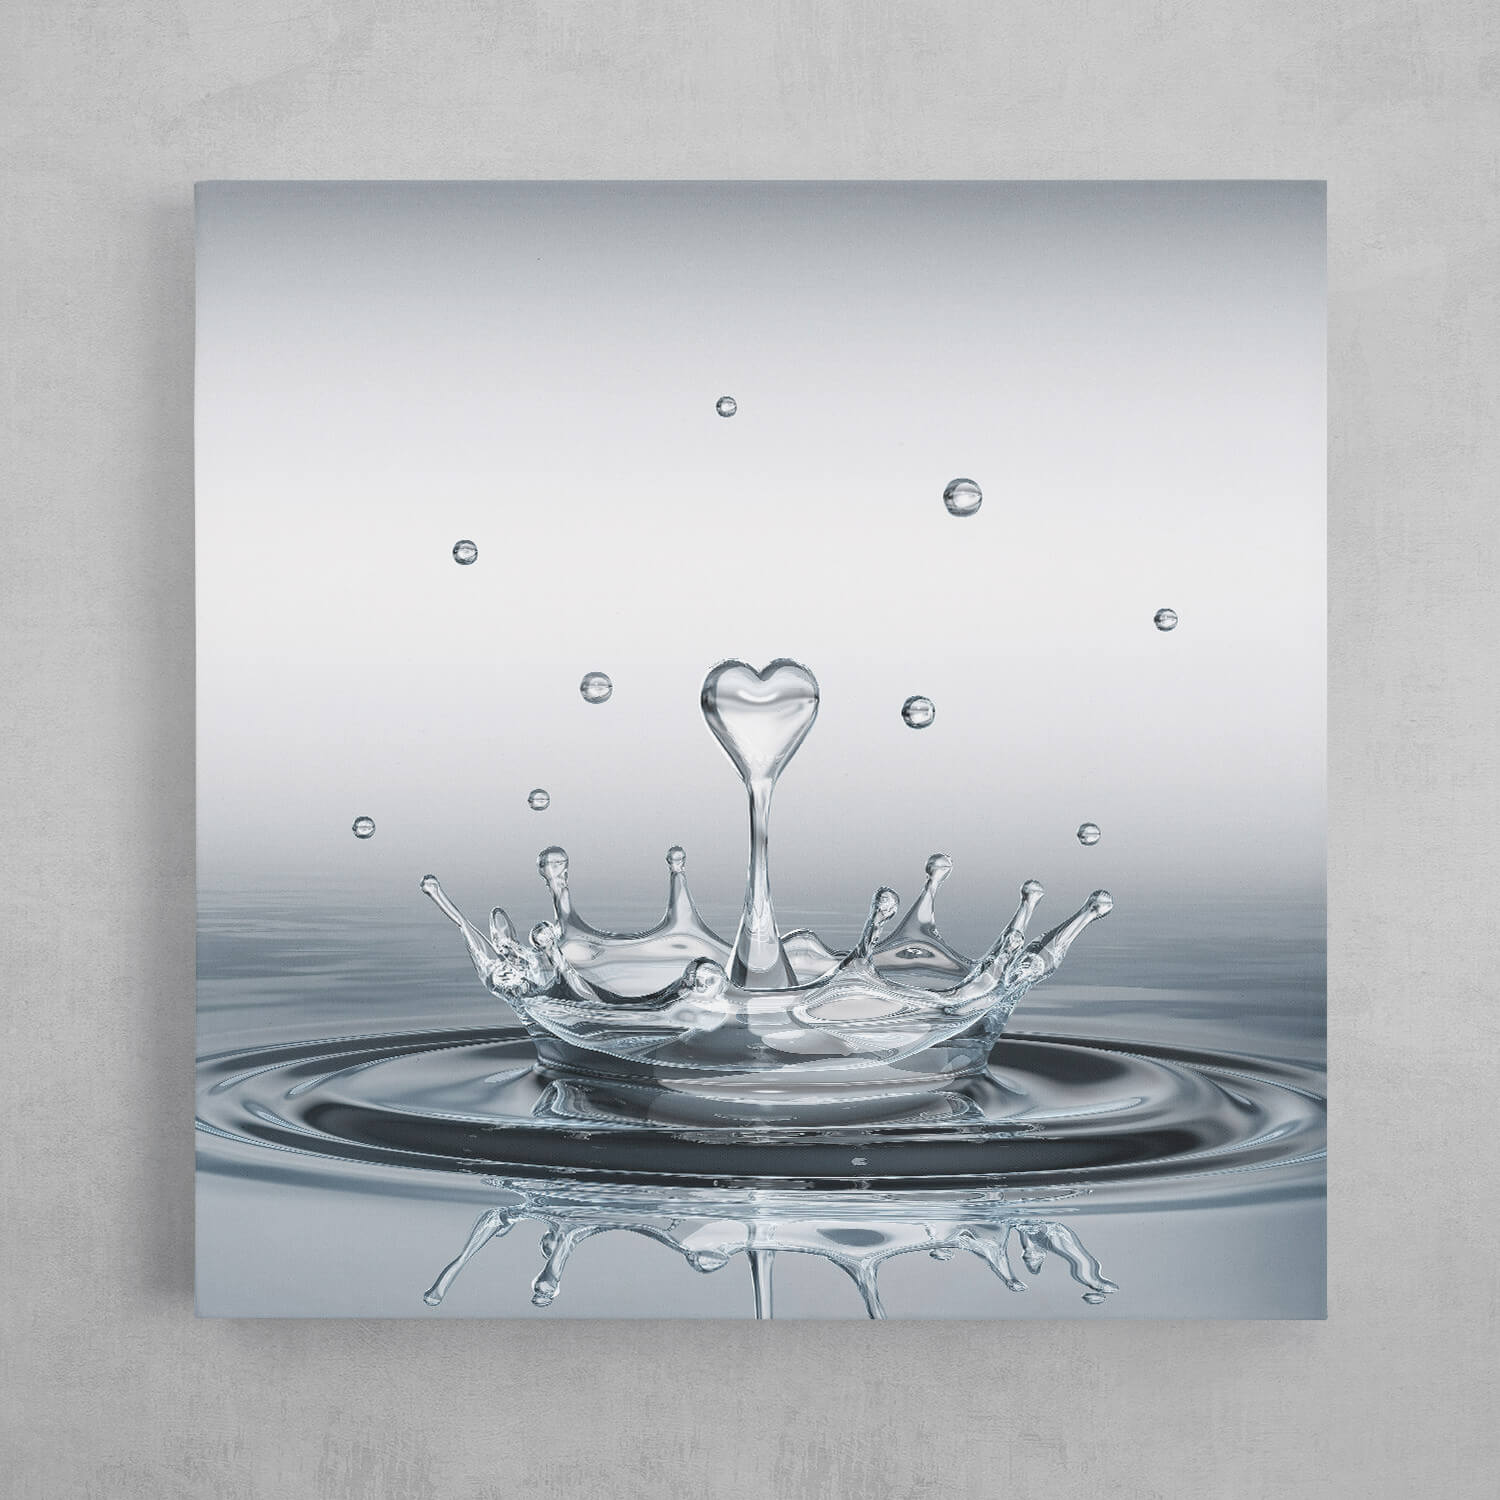 Water drop For sale as Framed Prints, Photos, Wall Art and Photo Gifts